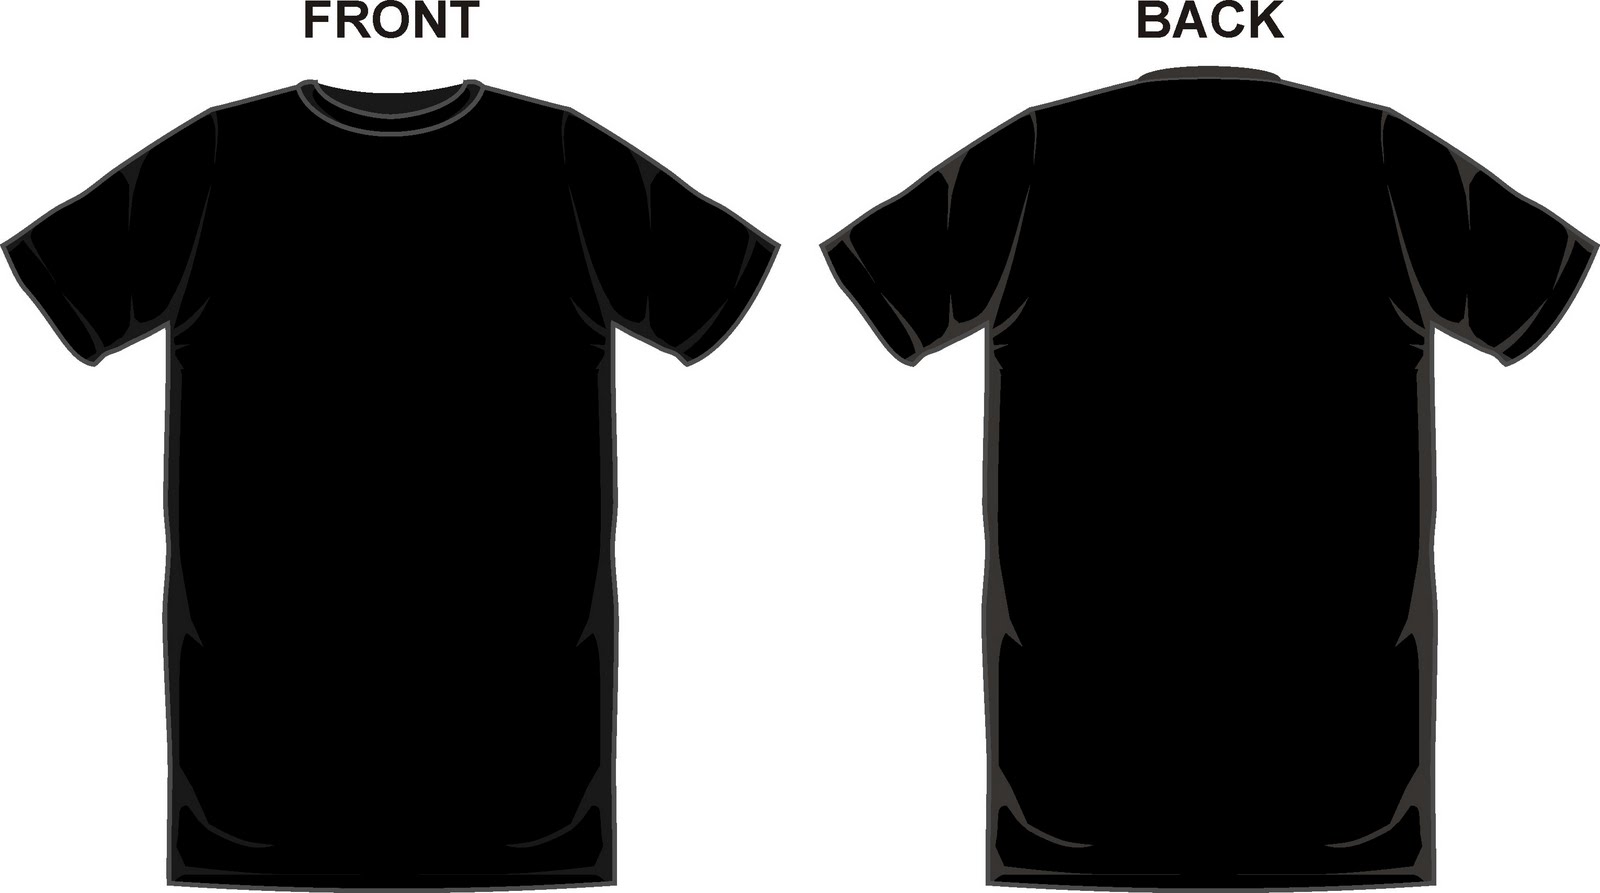 Black T-Shirt Template Front and Back